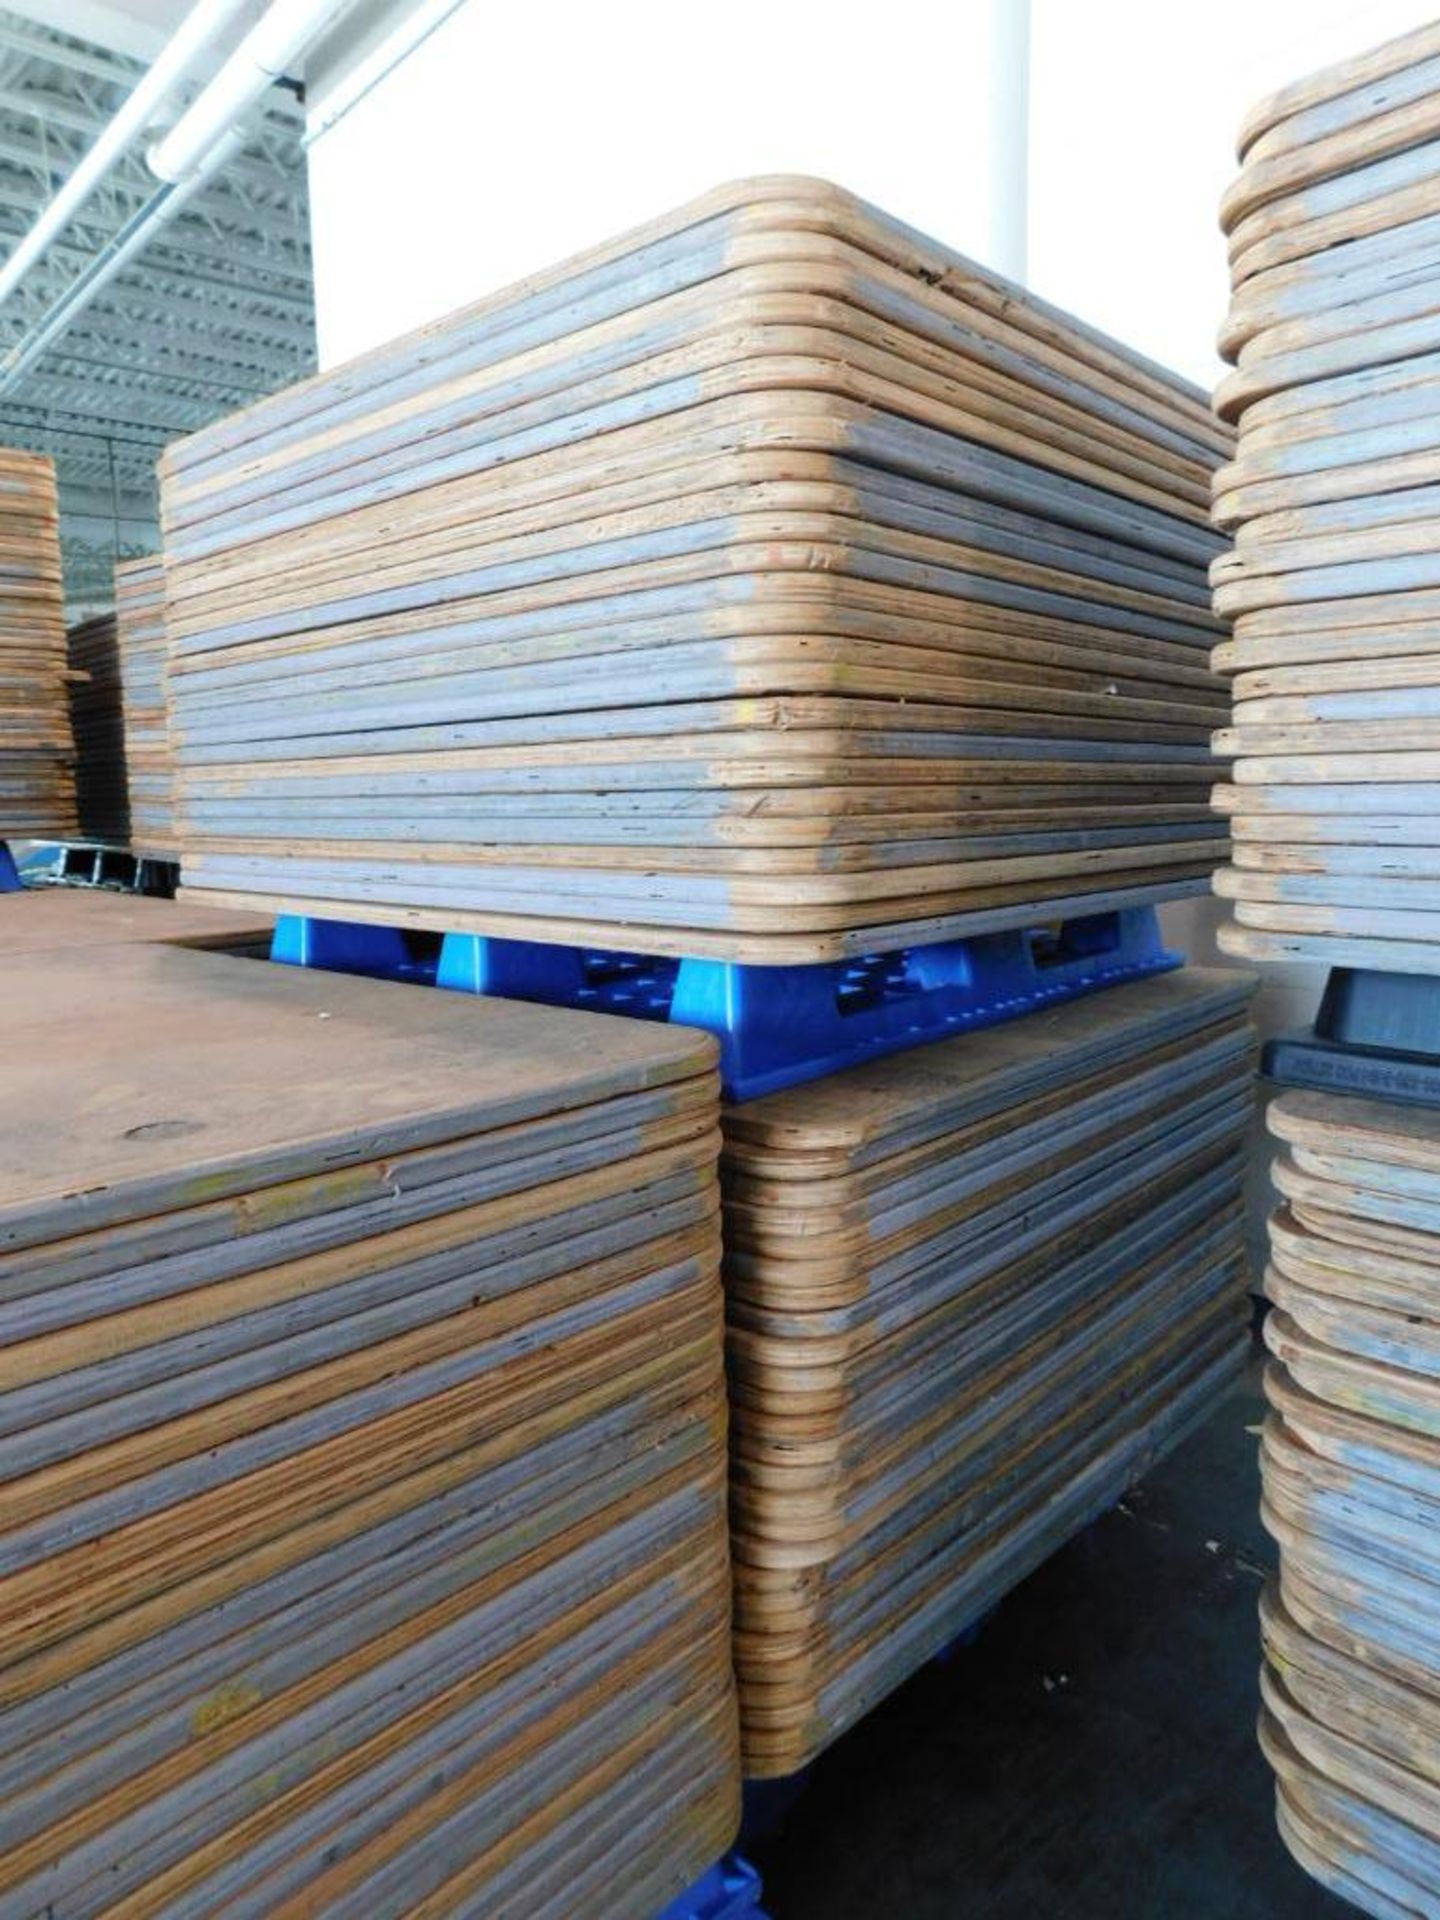 LOT: Large Quantity of 50" x 50" Wood Paper Roll Pallets on (7) Plastic Pallets (LOCATION: IN MAIL R - Image 3 of 6